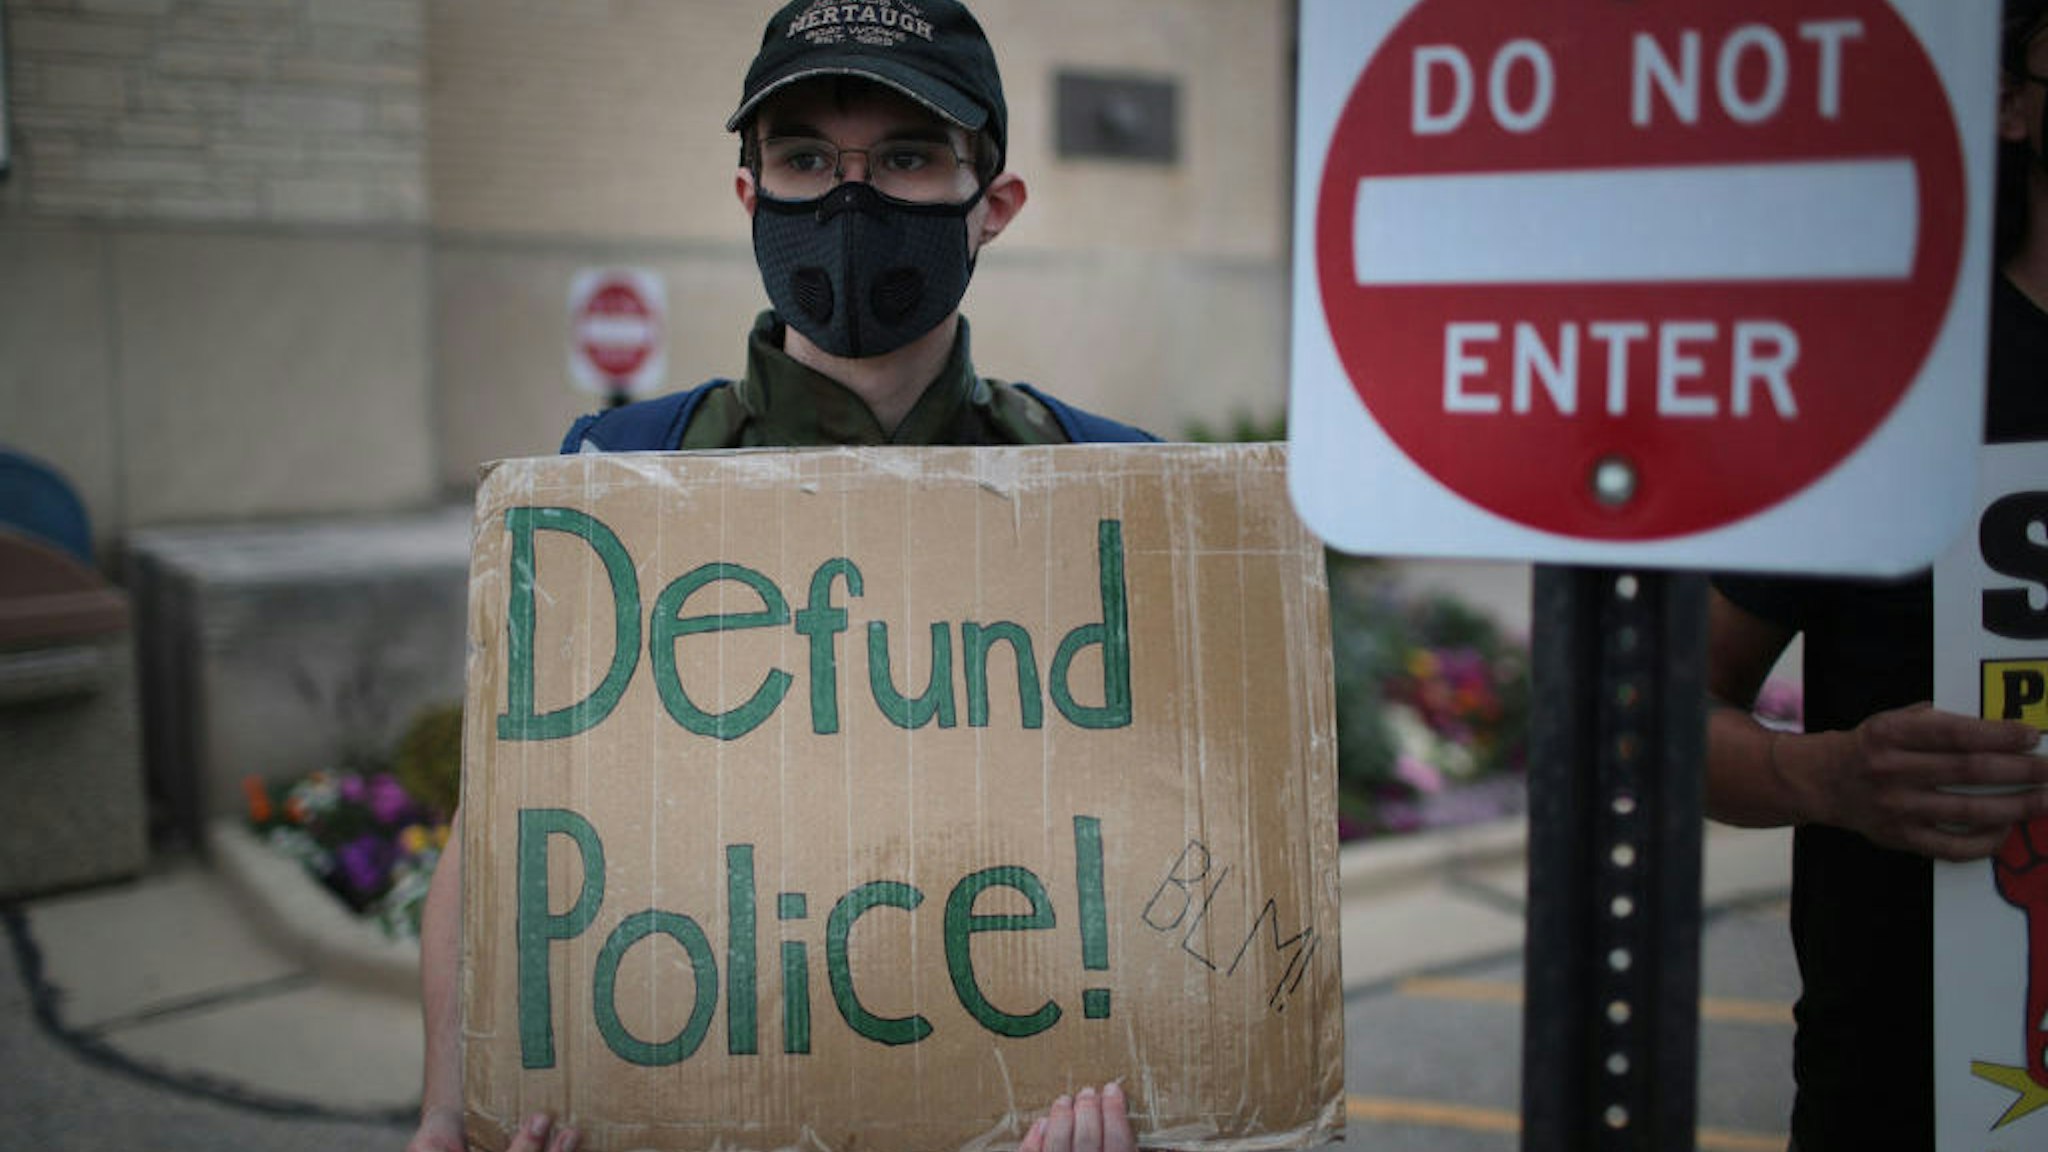 A small group of peaceful demonstrators protesting the shooting of Jacob Blake hold a rally on August 28, 2020 in Kenosha, Wisconsin. Blake was shot seven times in the back in front of his three children by a police officer. The shooting has led to several days of rioting and protests in the city. (Photo by Scott Olson/Getty Images)